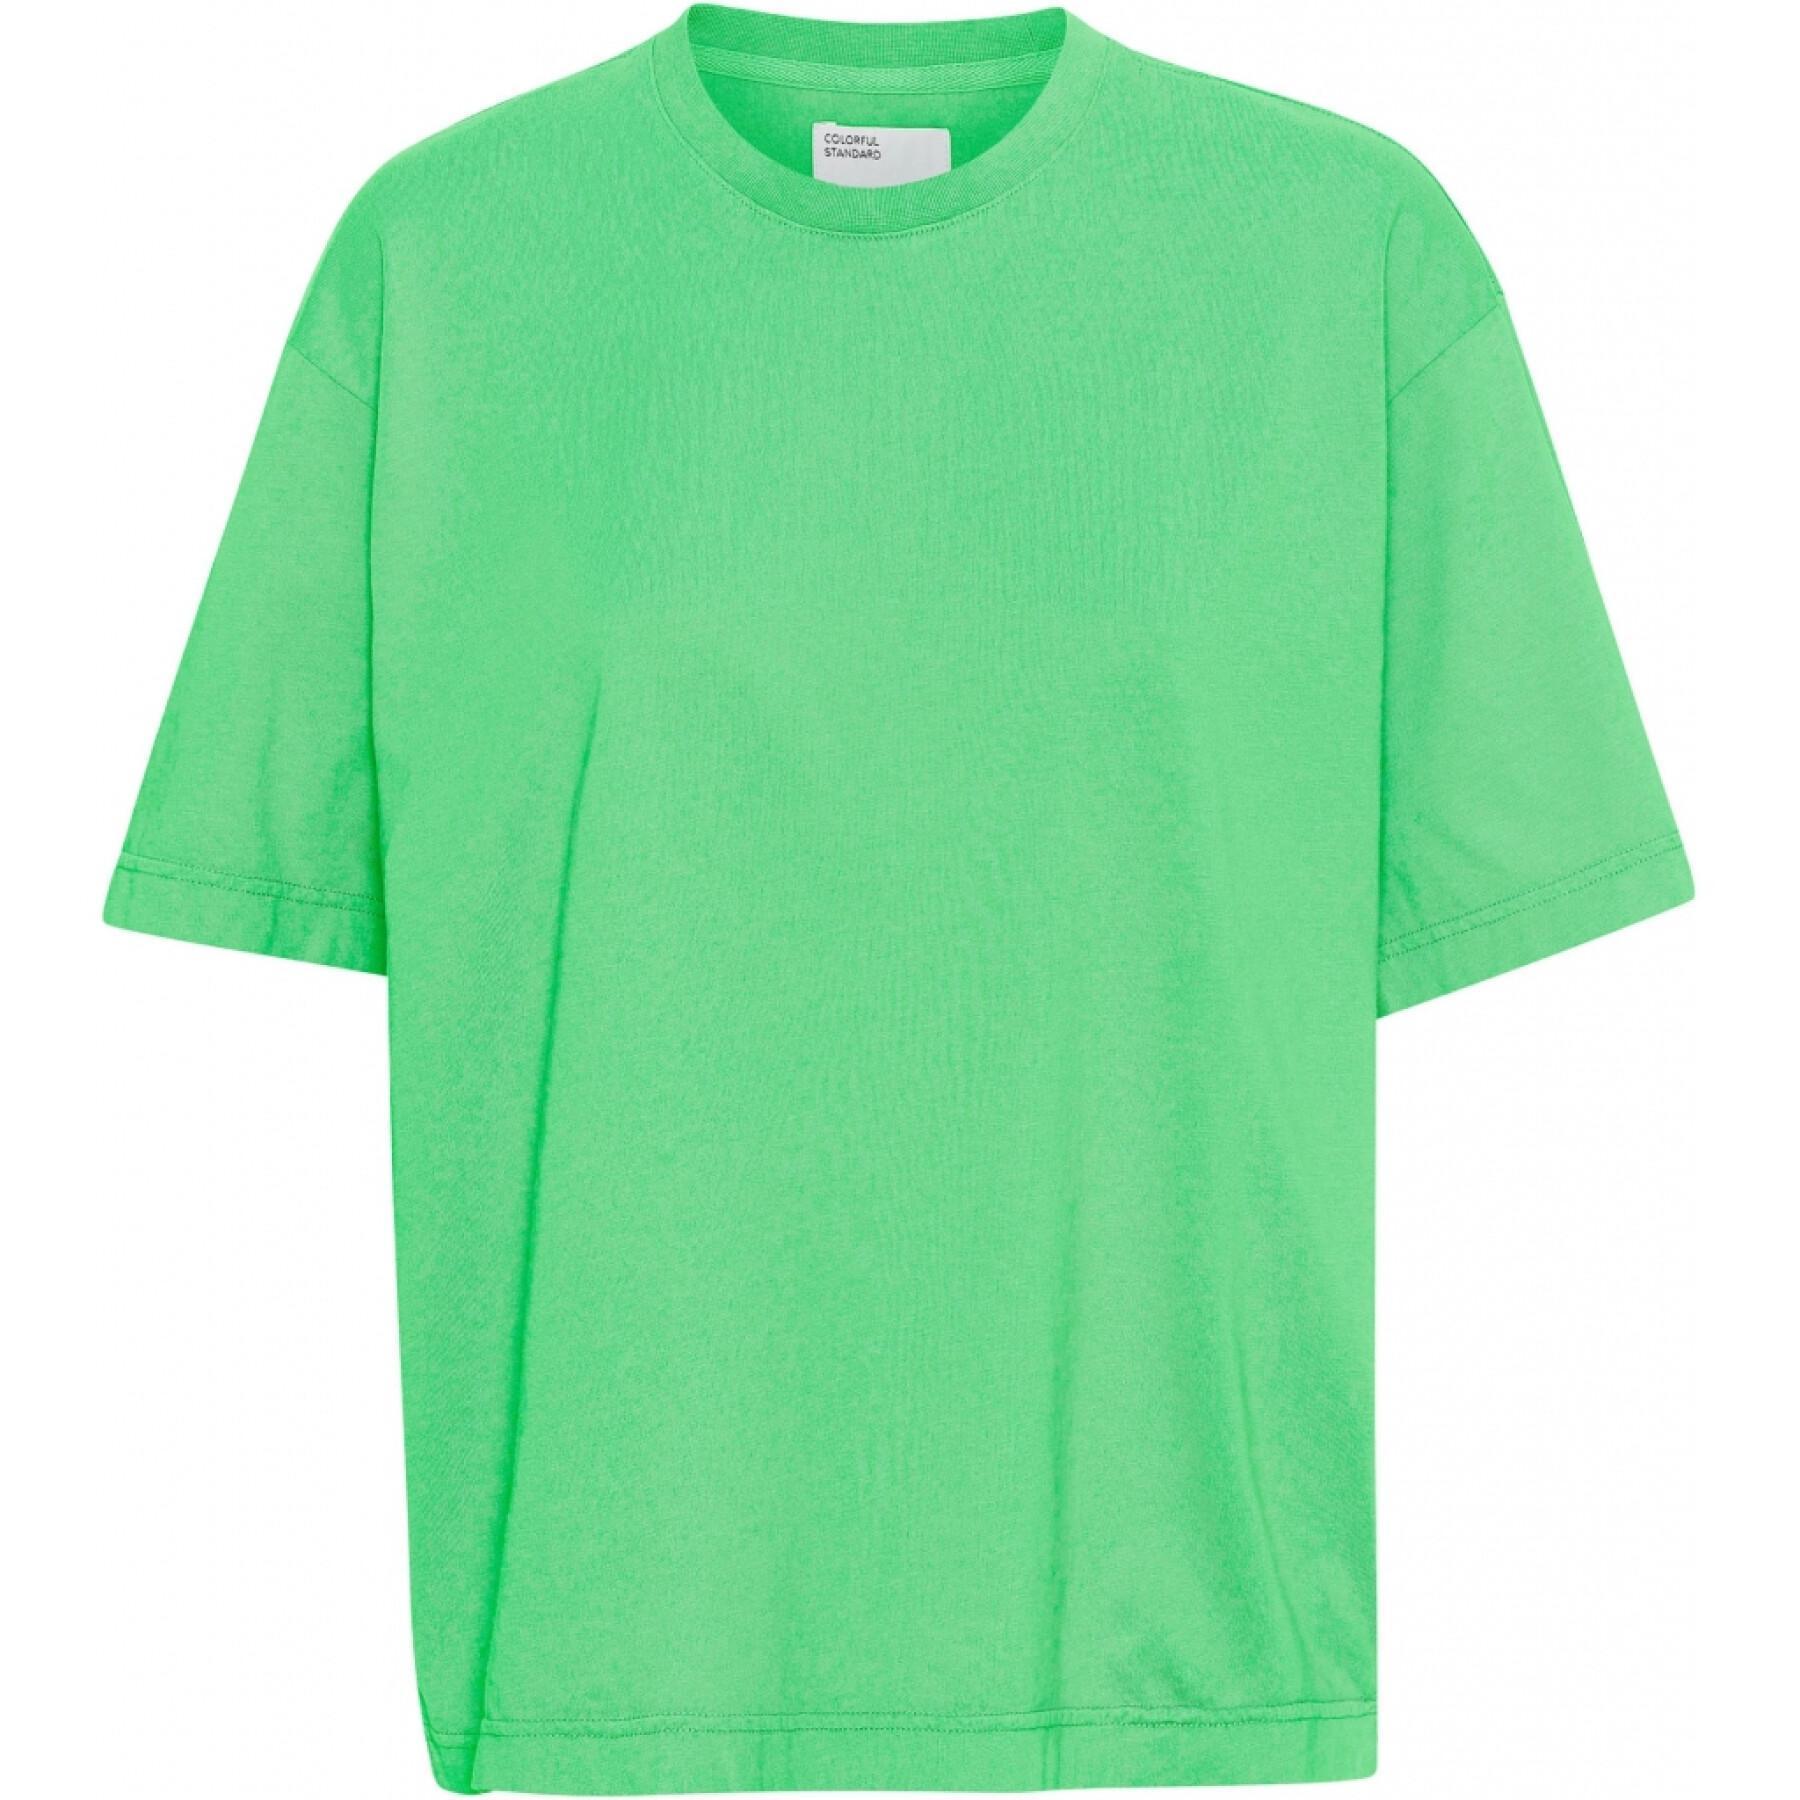 Dames-T-shirt Colorful Standard Organic oversized spring green